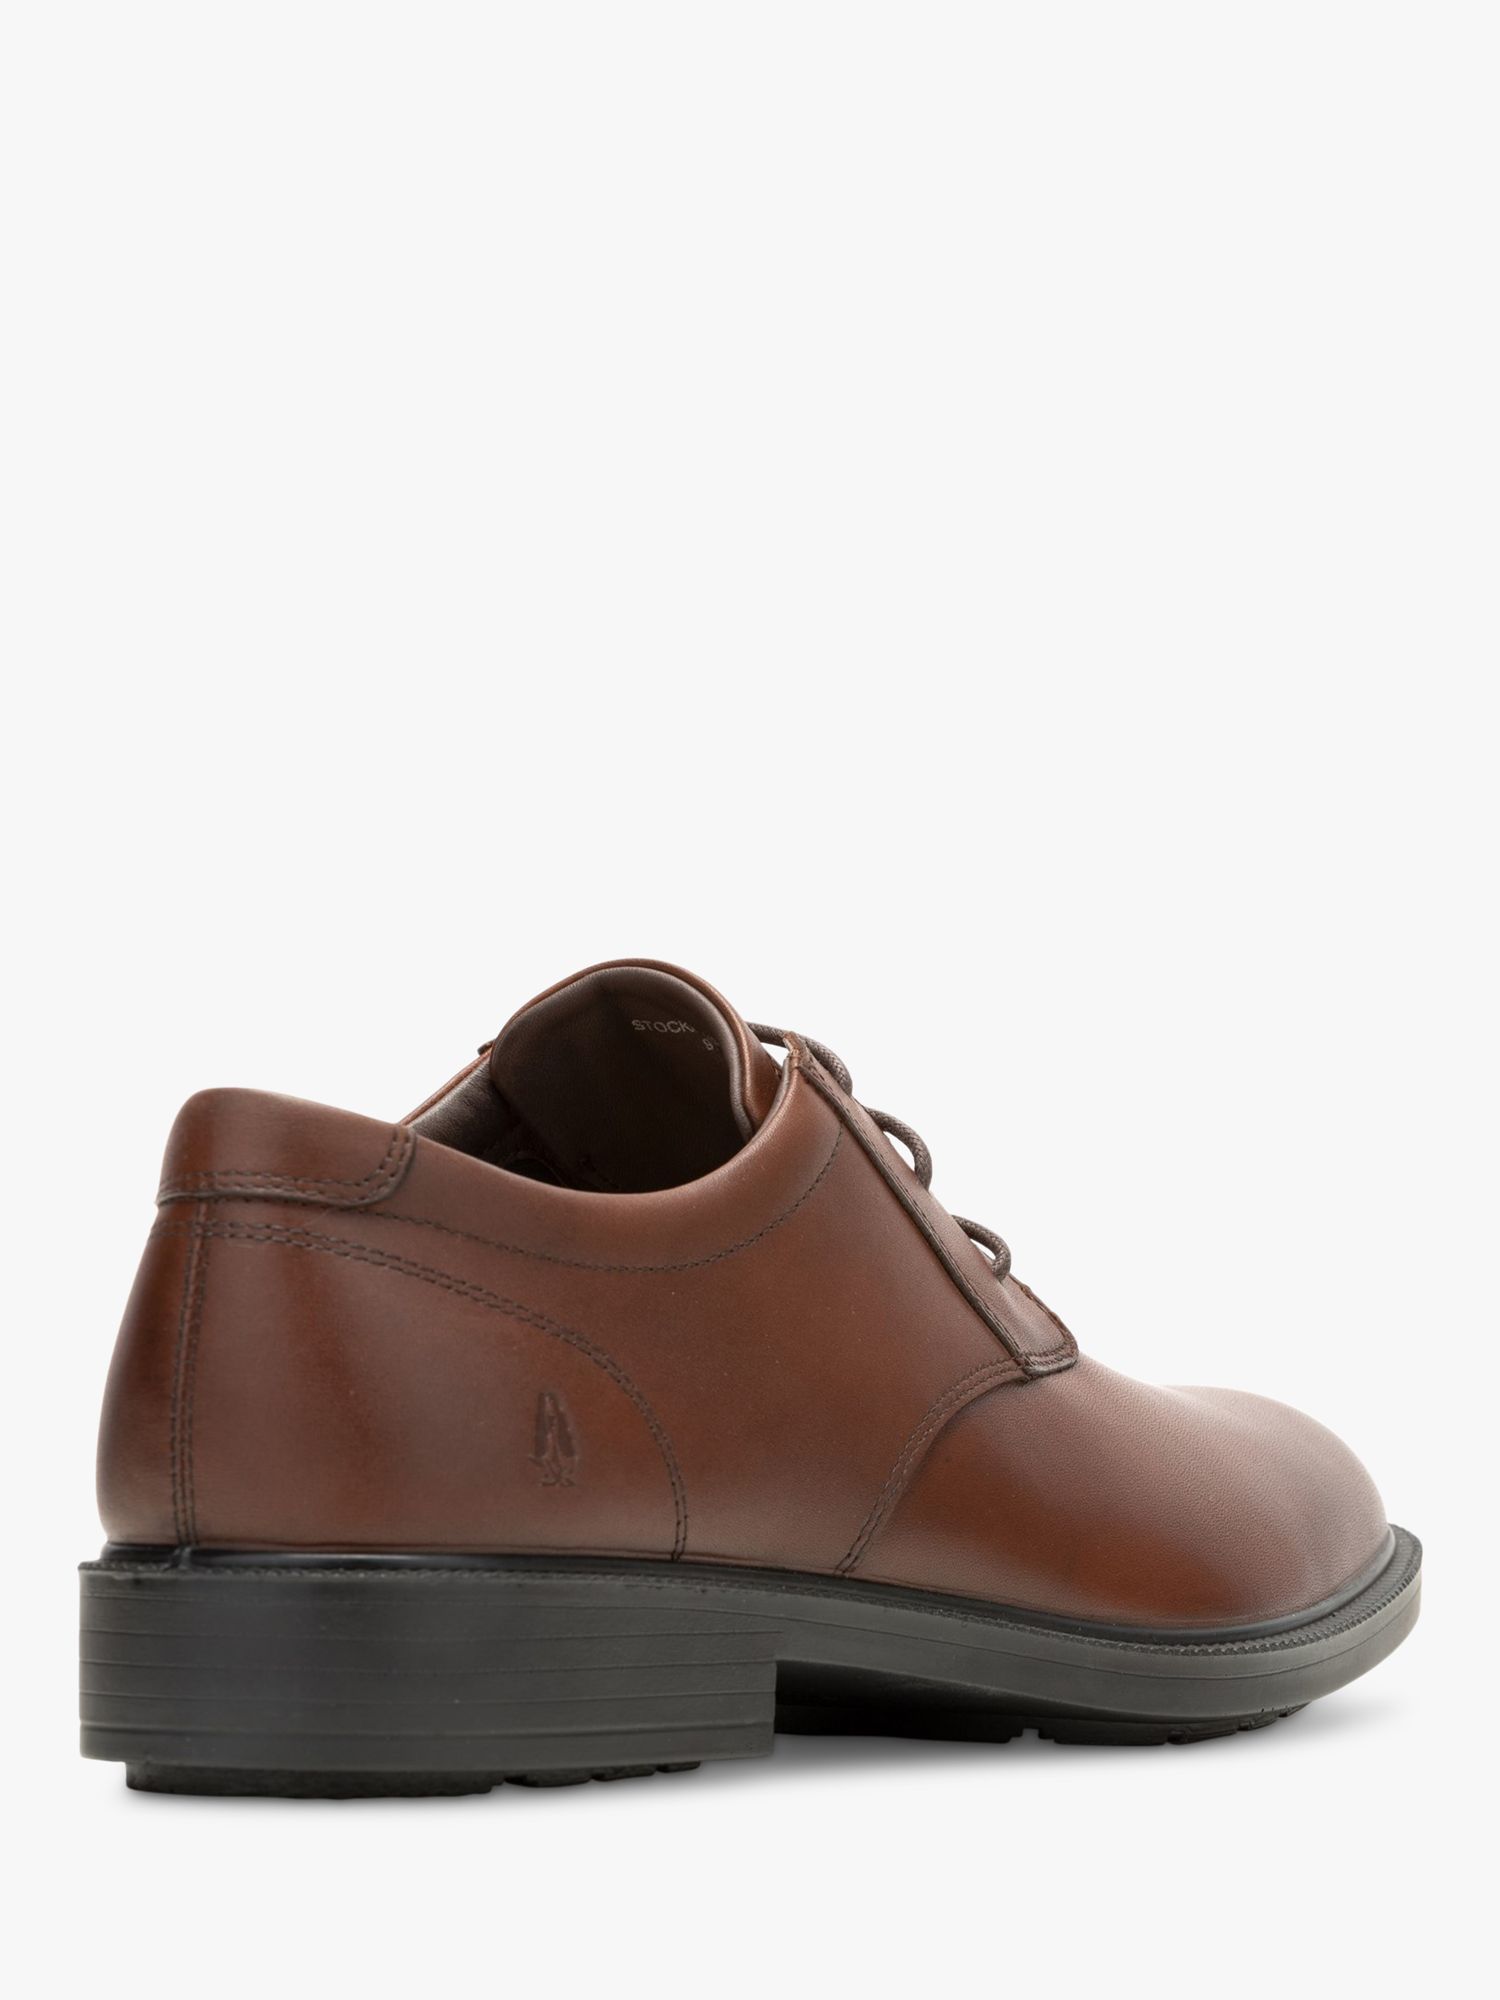 Hush Puppies Banker Lace-Up Shoes, Brown, 9.5